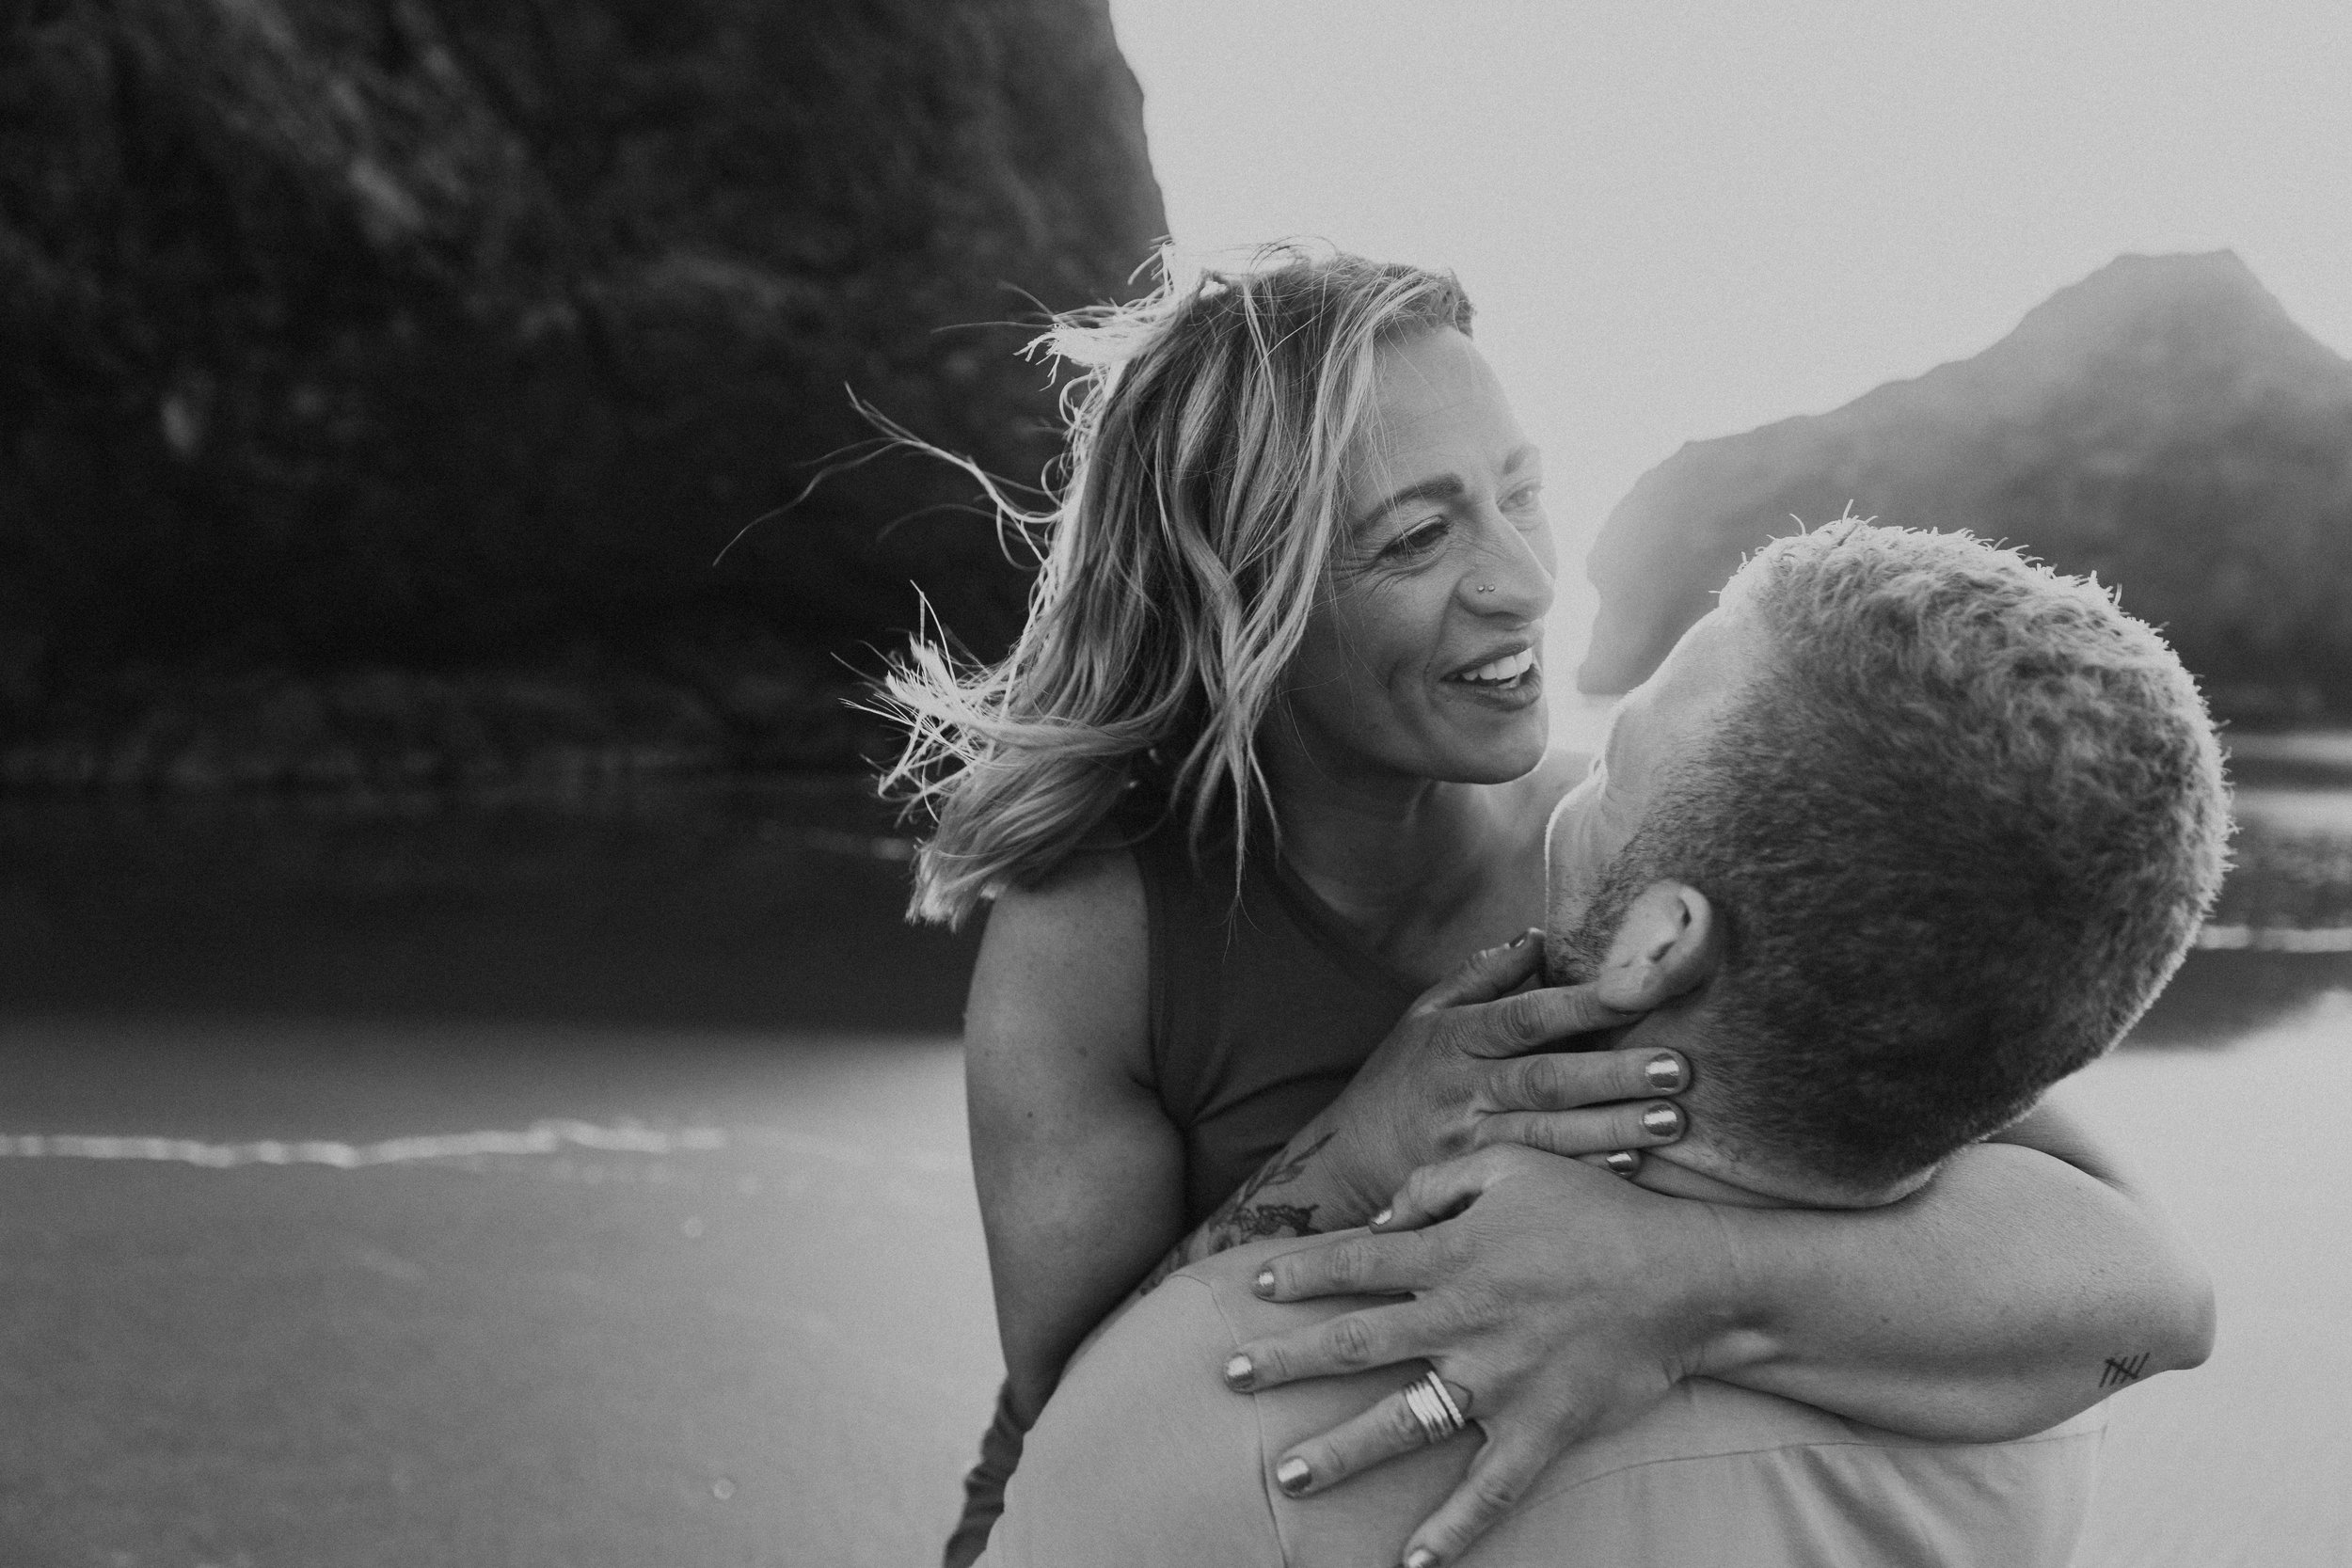  Oregon coast engagement session. Couples session in Southern Oregon. Couple playing on the beach with the sunset behind them at golden hour. Man and woman cuddle up together as the sun sets behind them between the huge rocks on the beach. Black and 